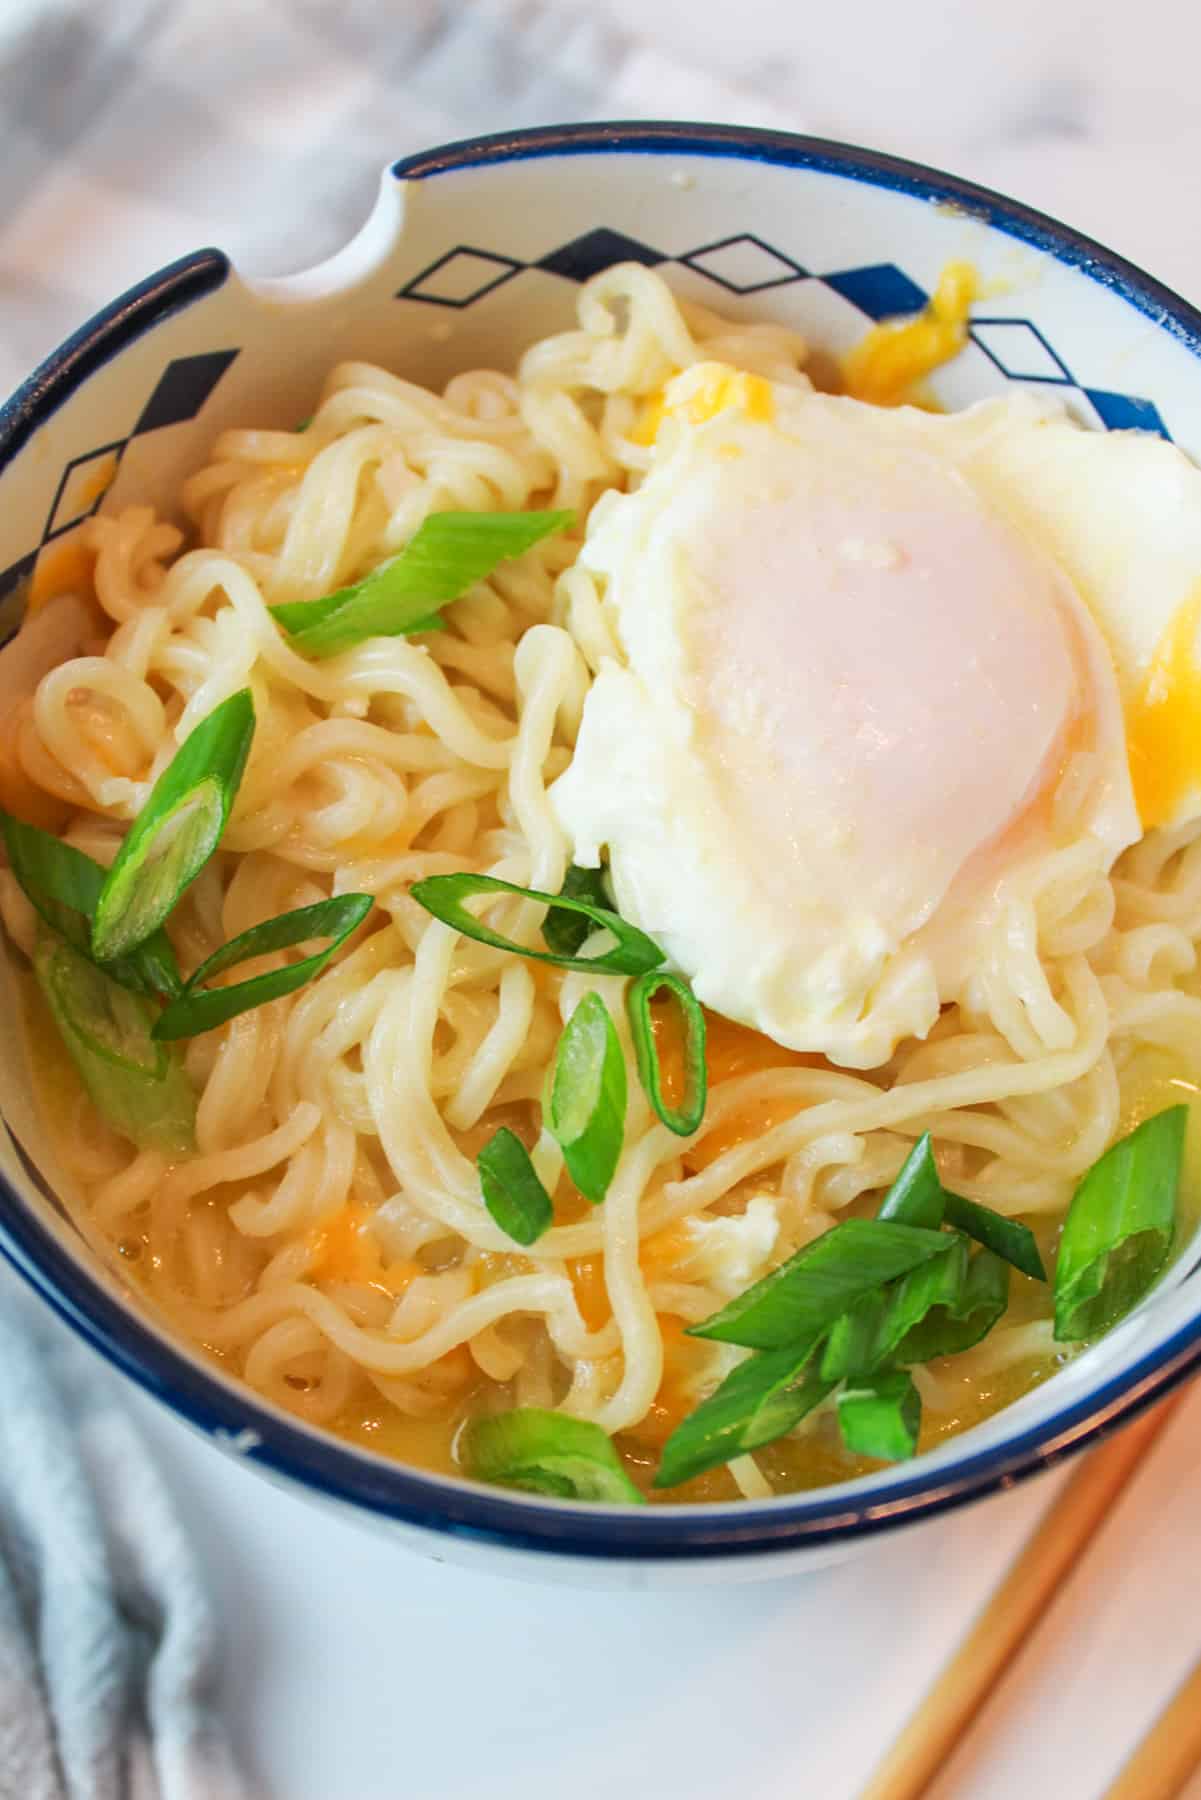 a bowl filled with cheesy ramen, a poached egg, and sliced green onion.